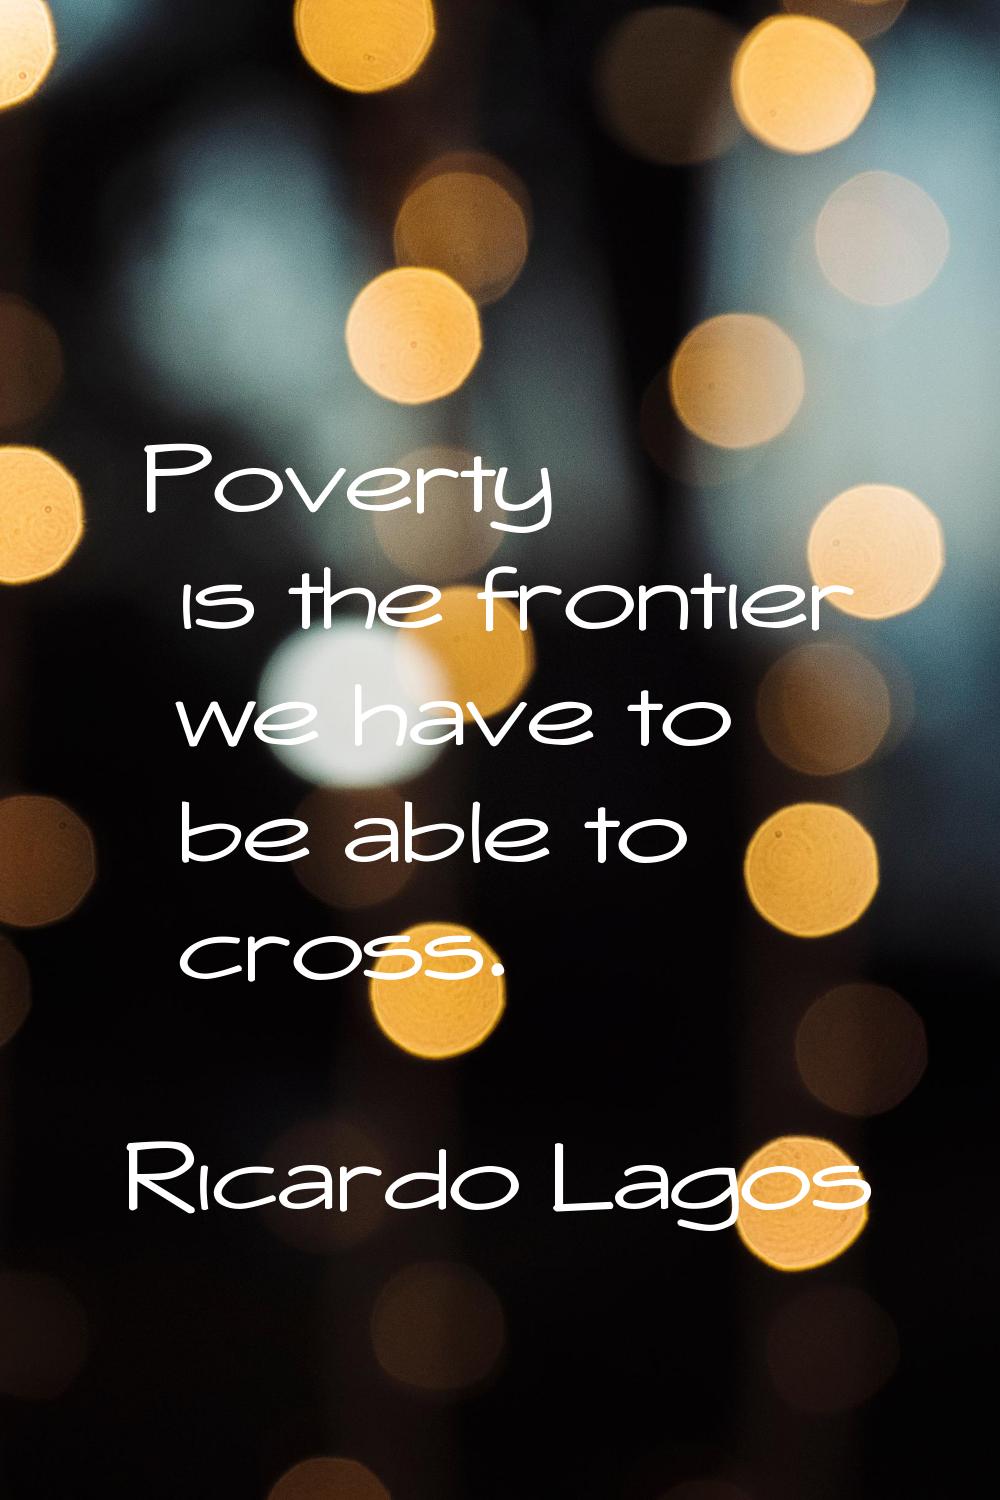 Poverty is the frontier we have to be able to cross.